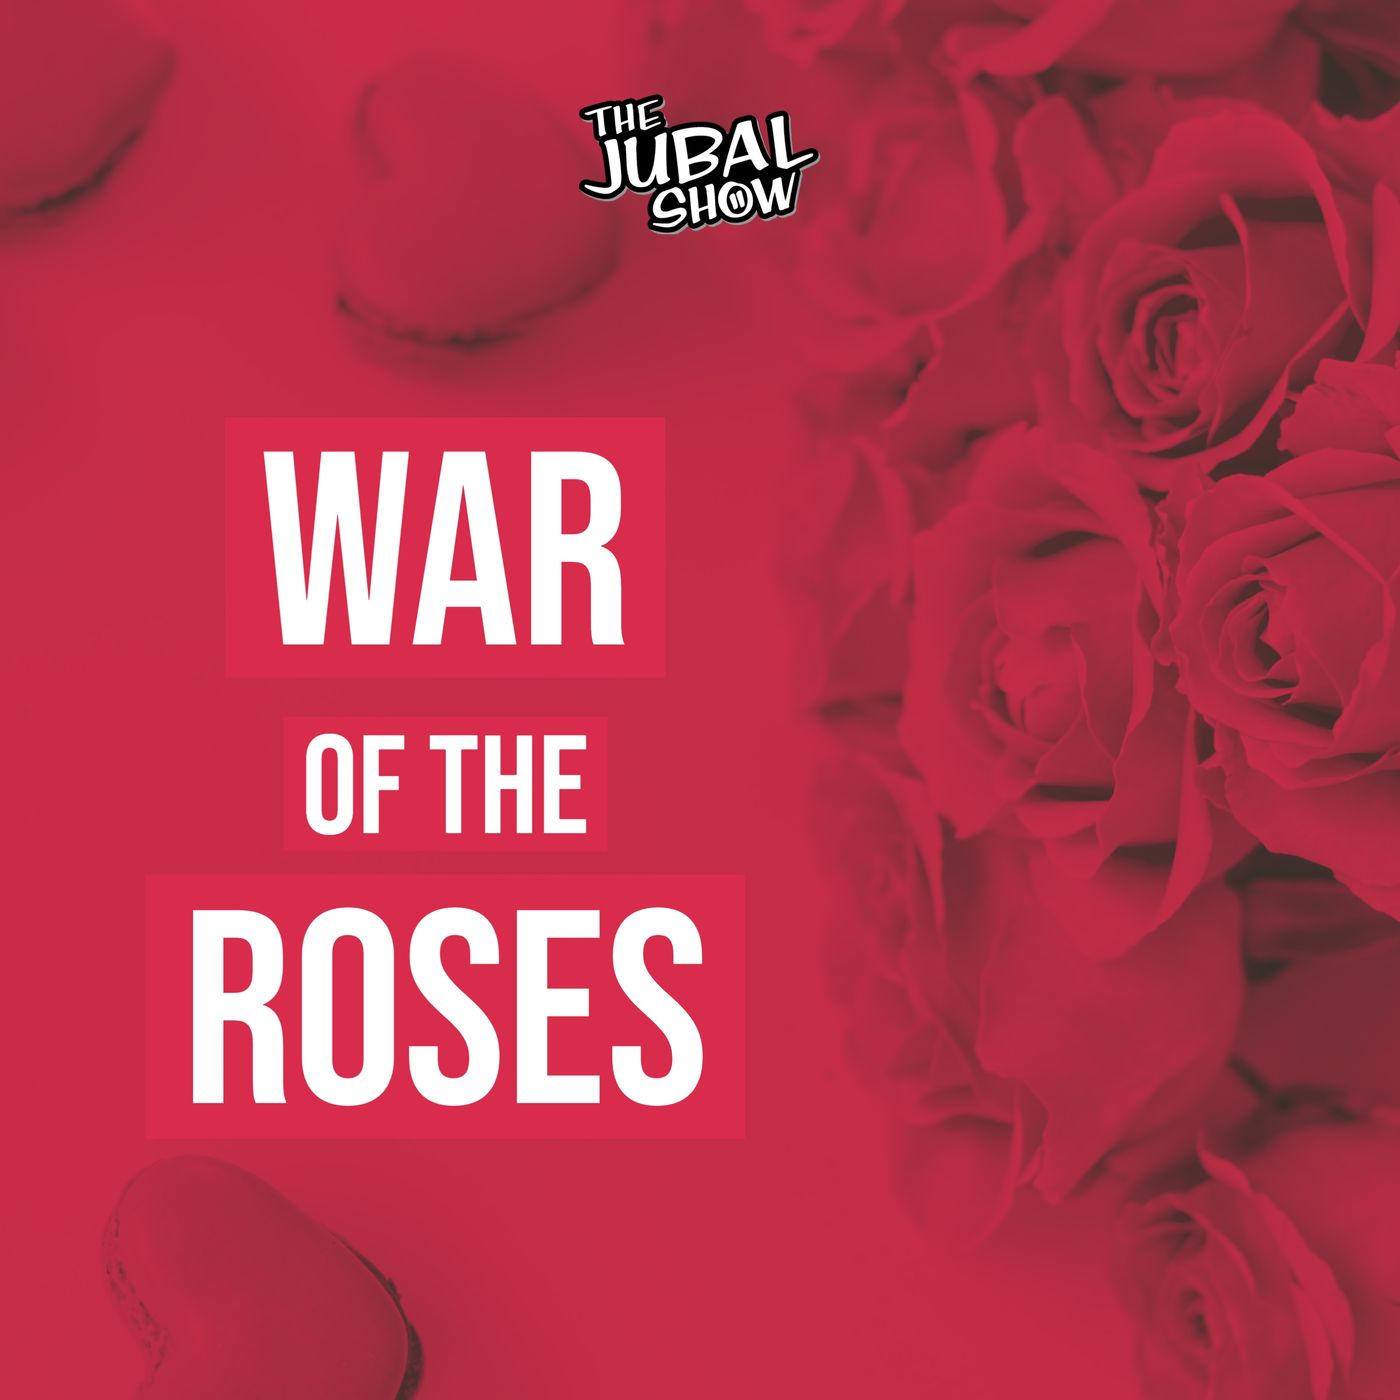 The Jubal Show brings sand to the beach in this War of the Roses!